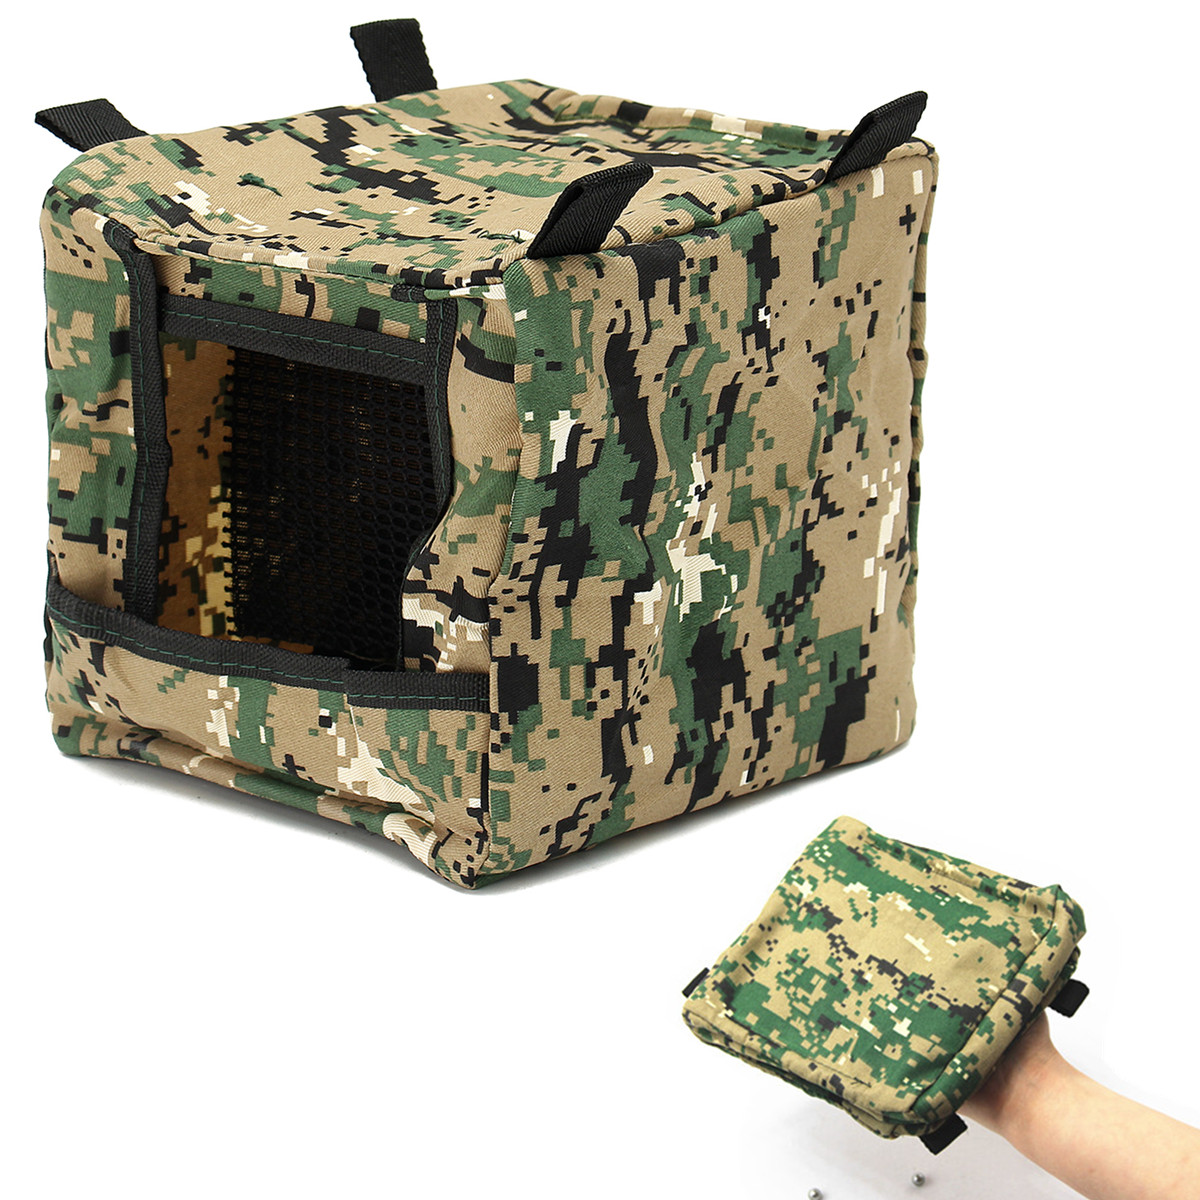 New Slingshot Target Box Recycle Ammo Hunting String Foldable Practice Target 